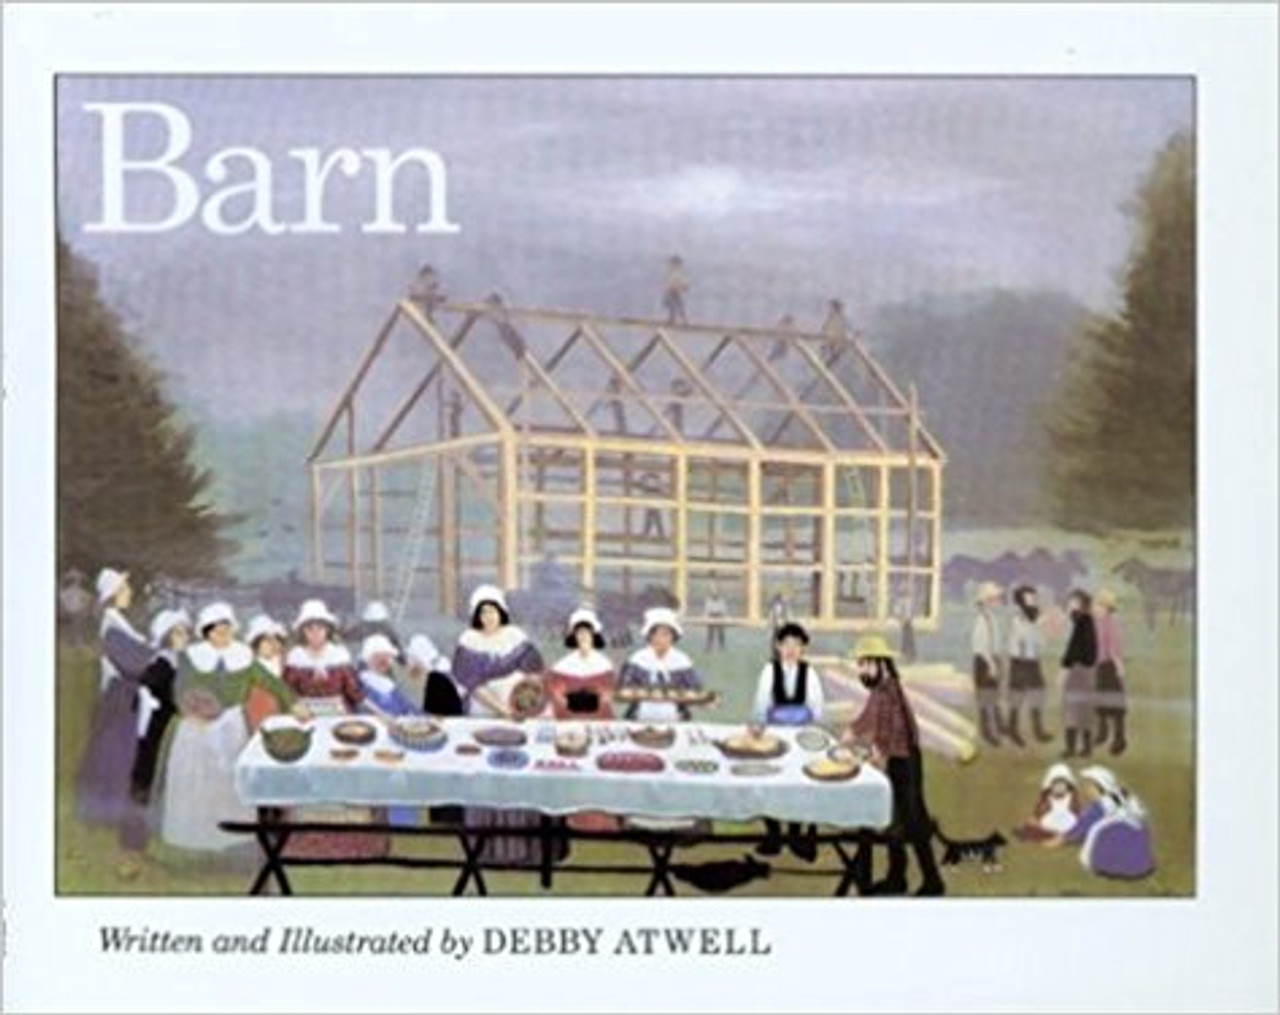 Barn by Debby Atwell